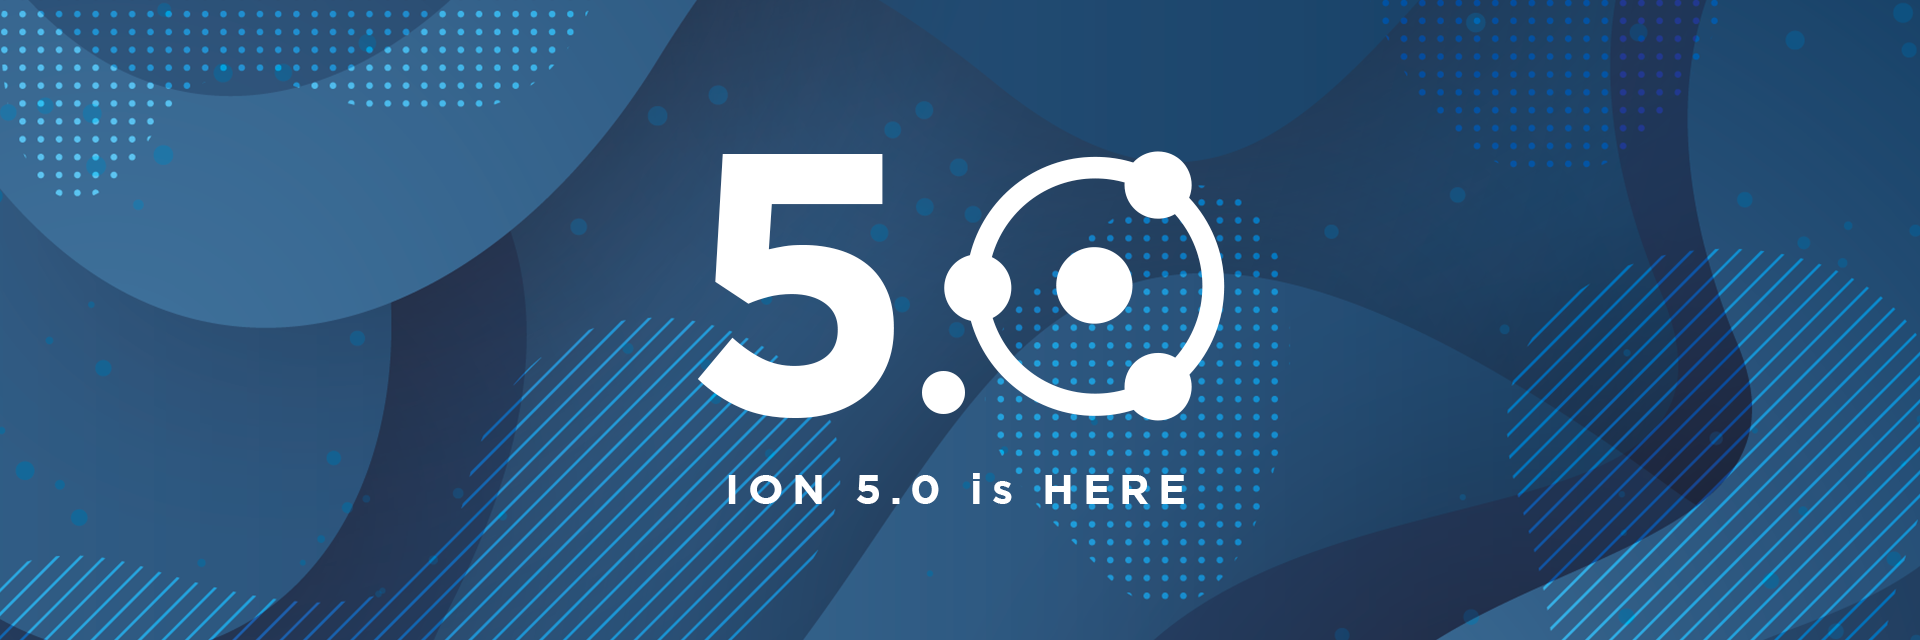 ION 5 is live!